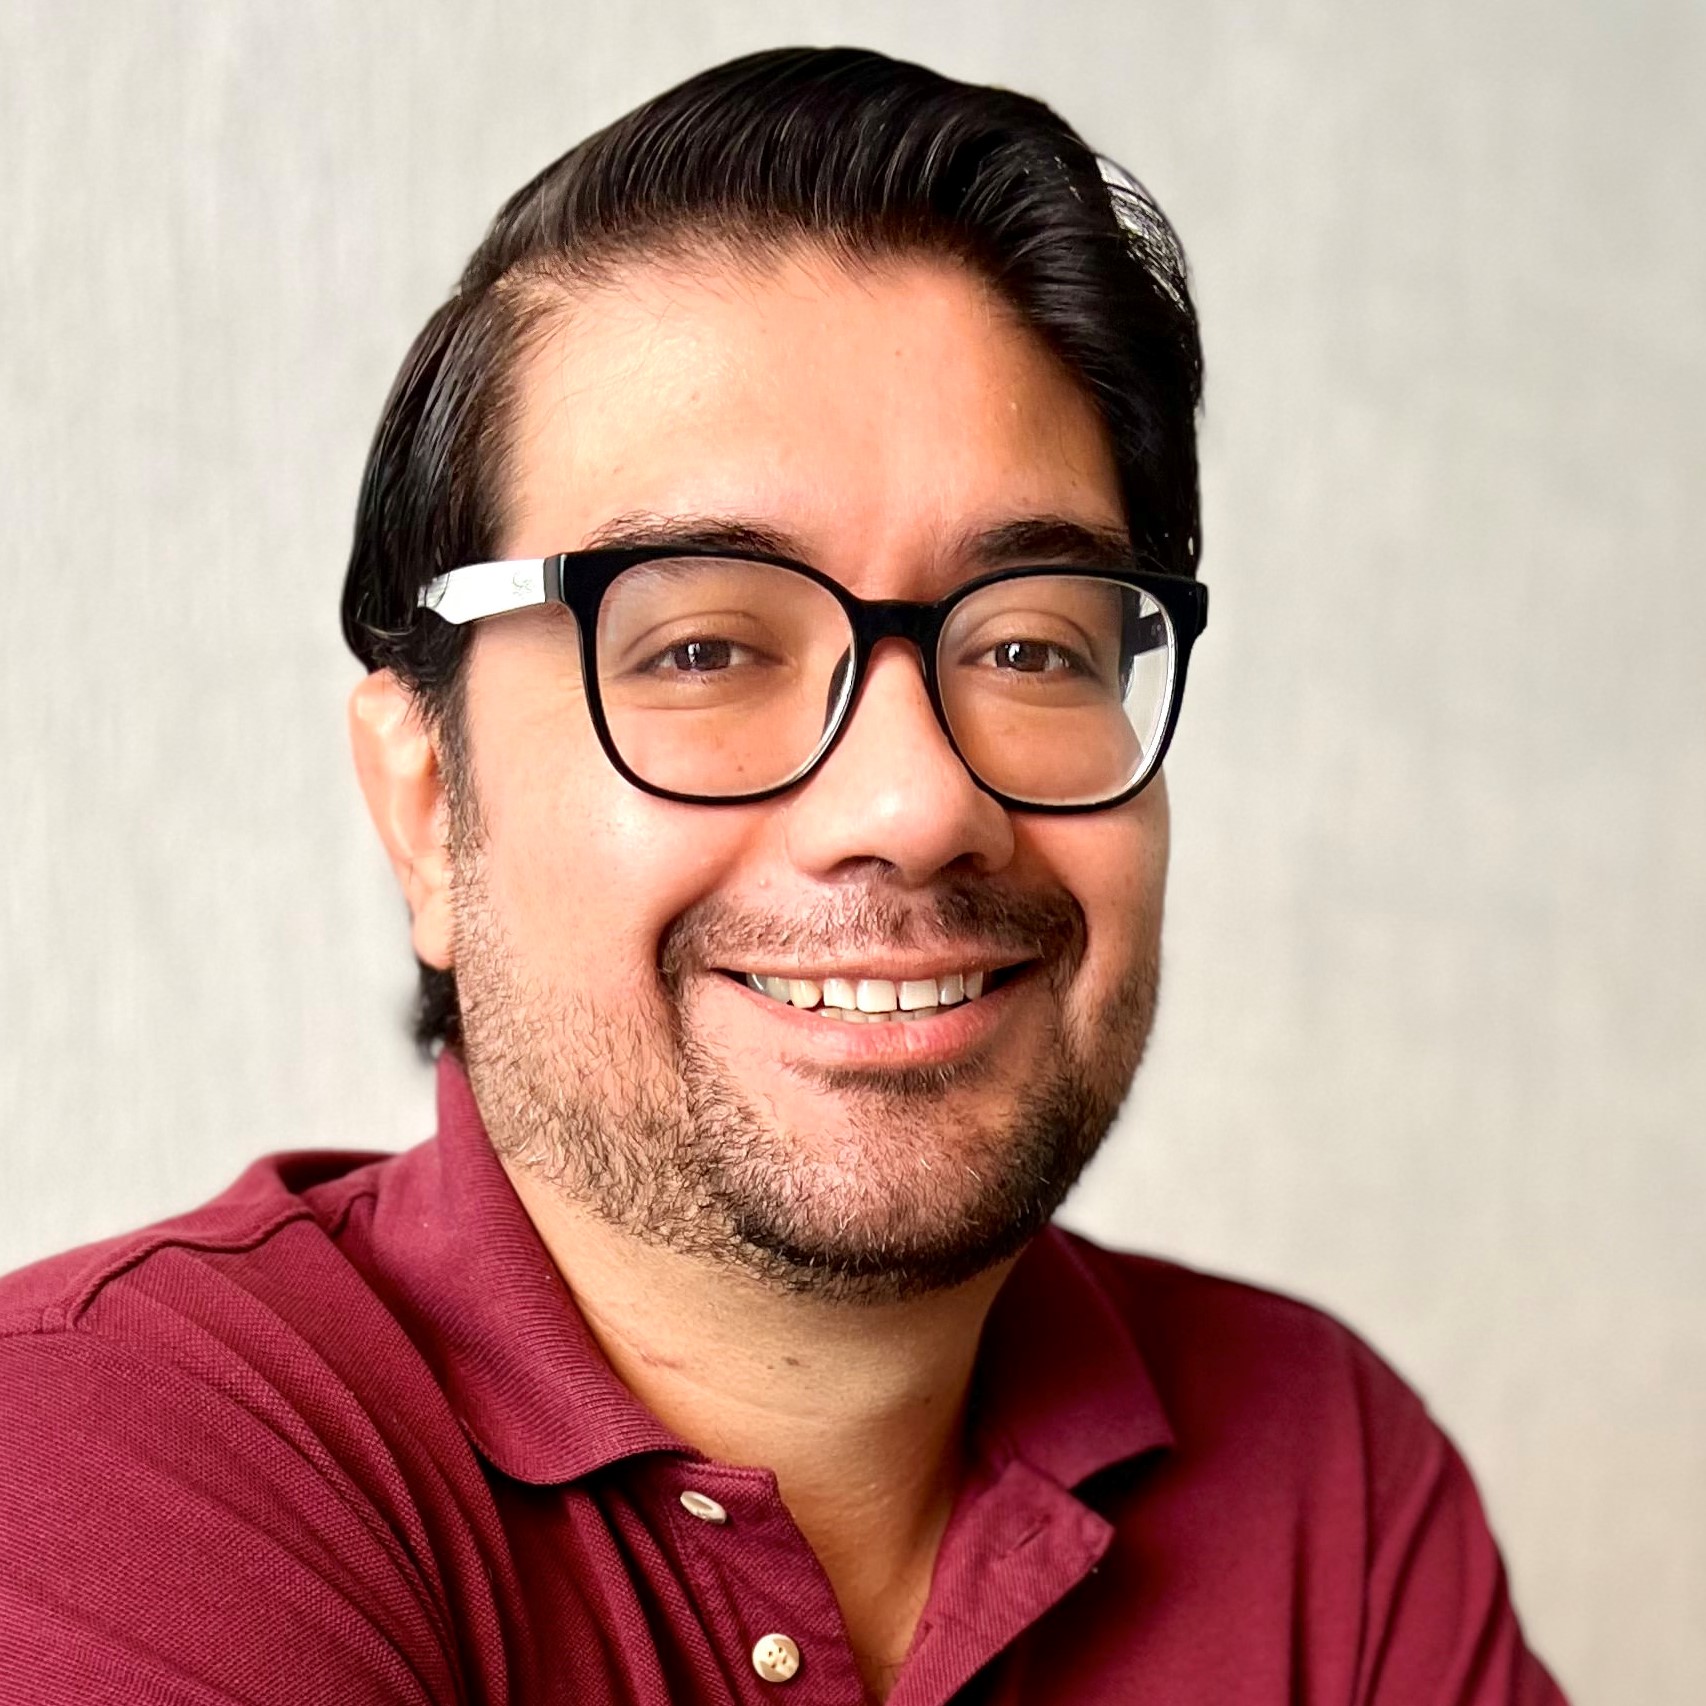 Sergio Nigenda-Morales in a red collared polo shirt and glasses.